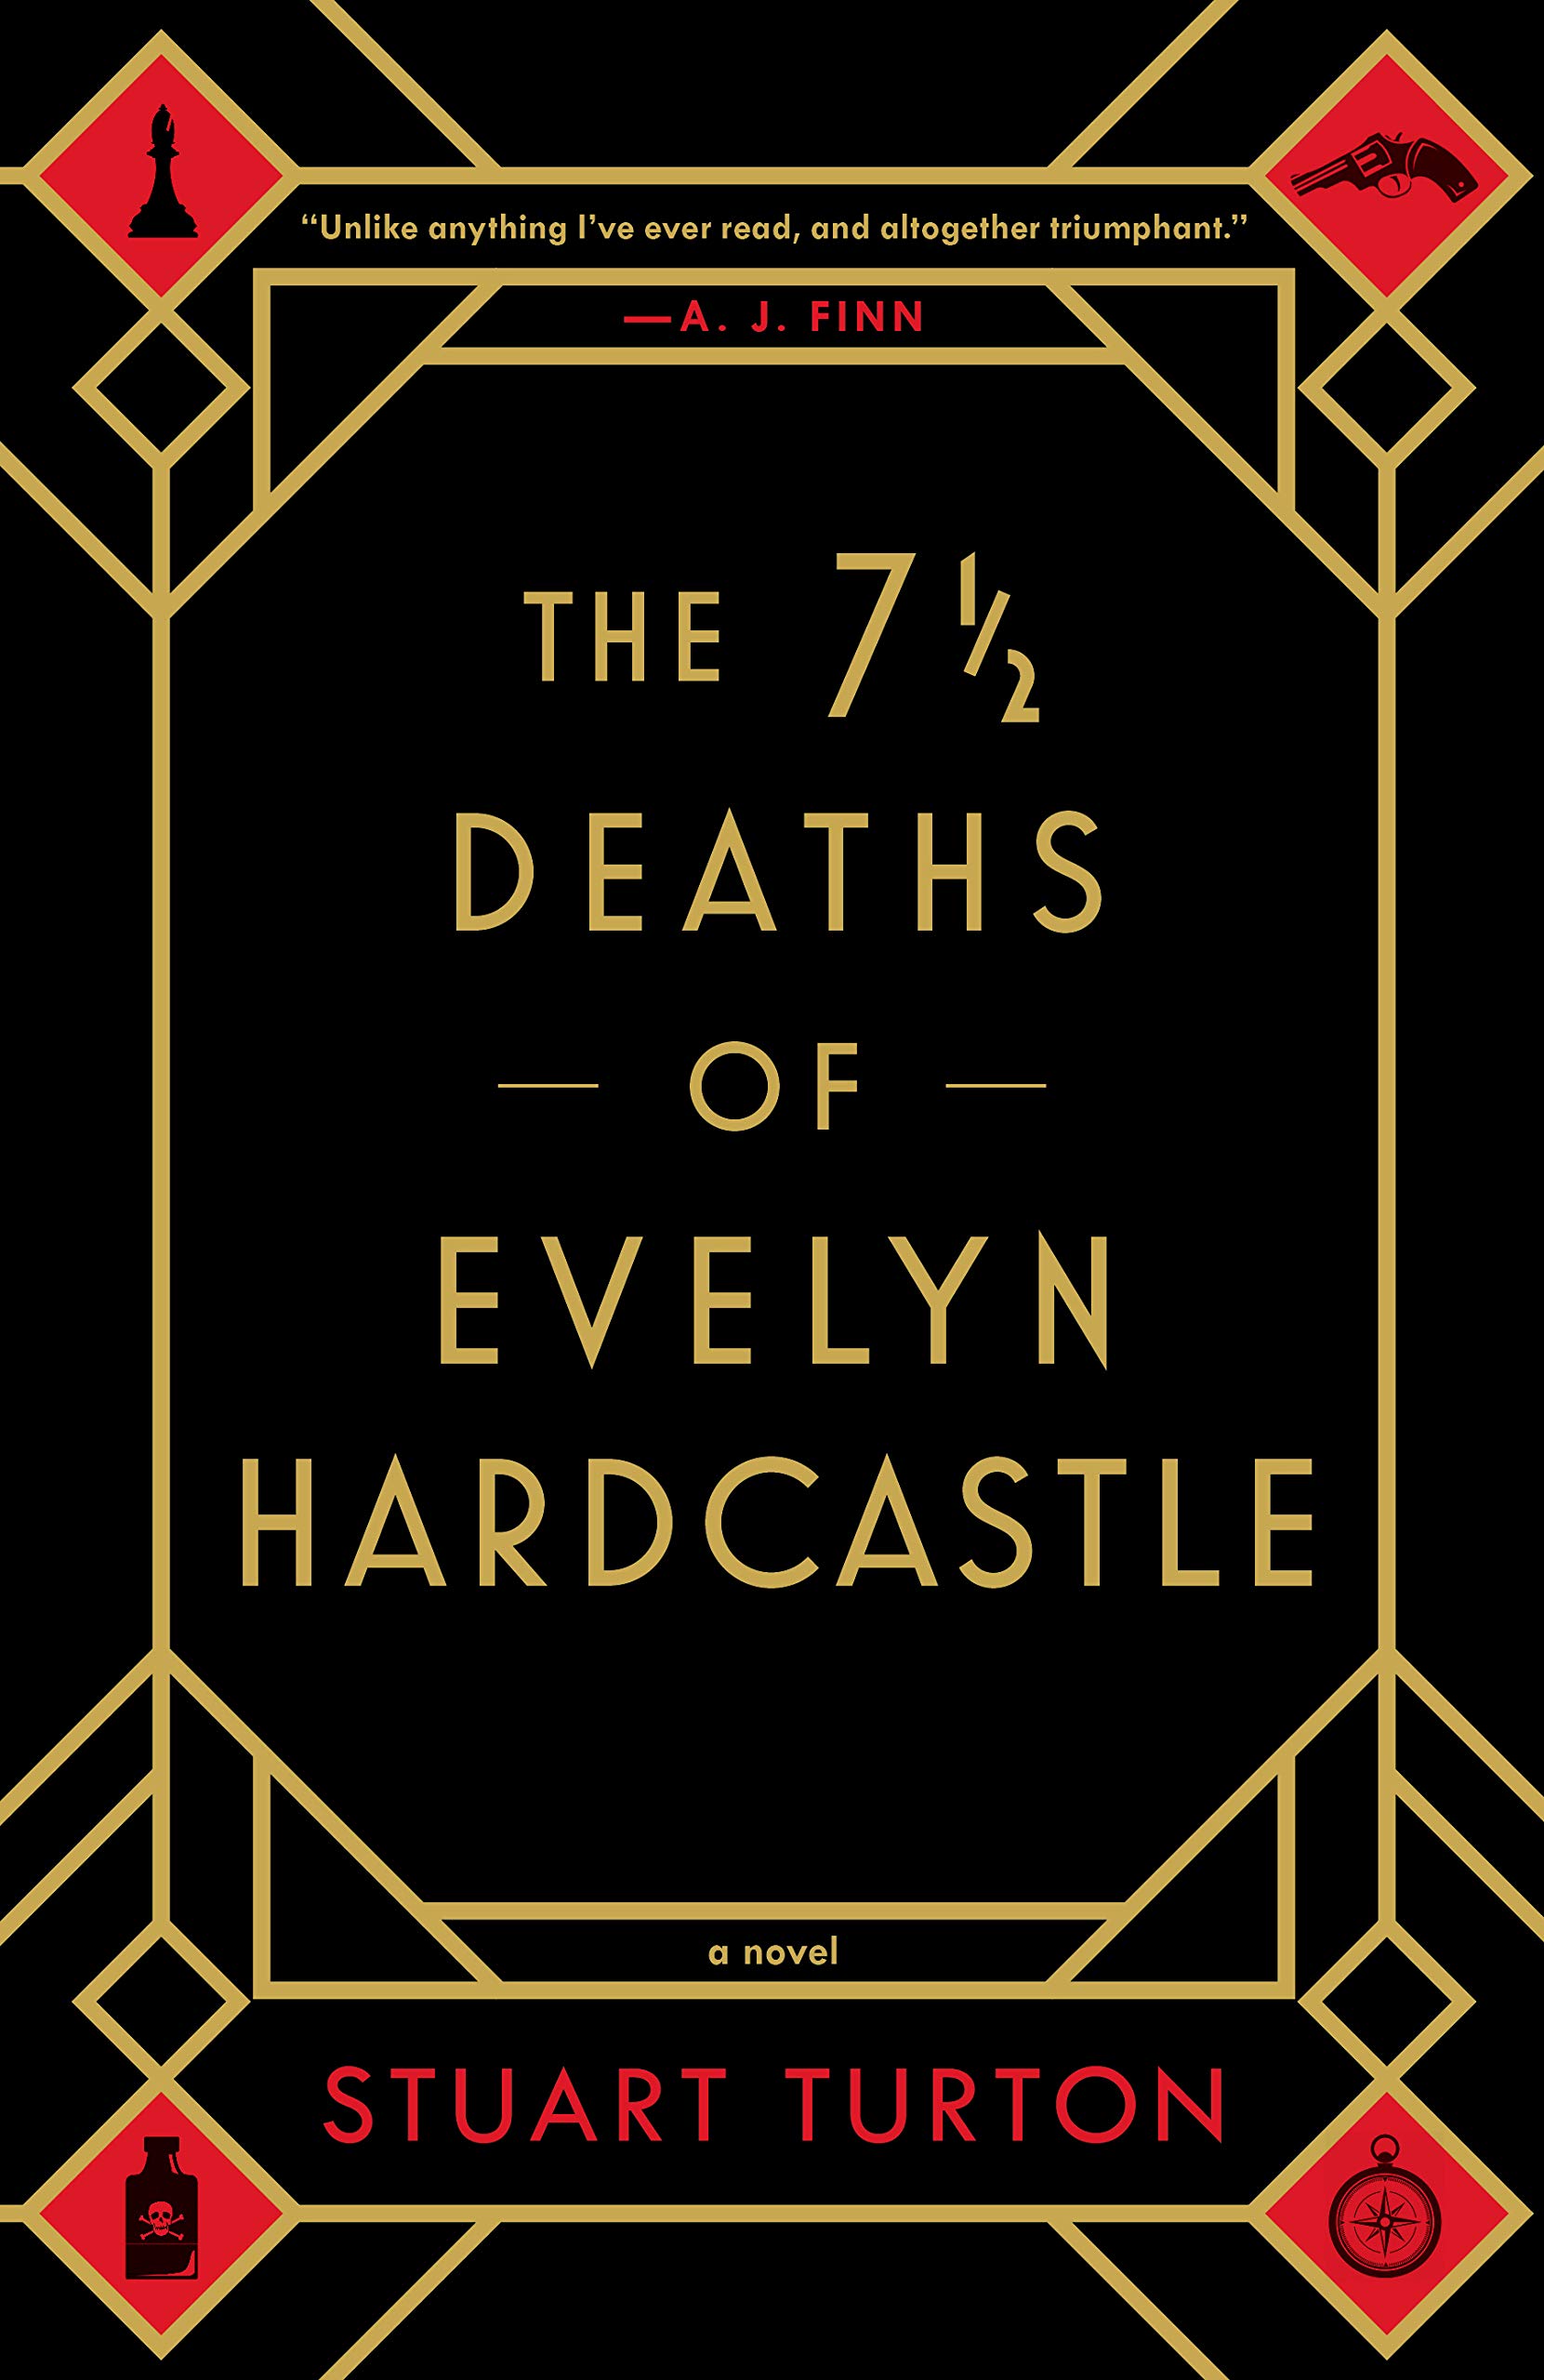 Book Jacket for The 7 1/2 Deaths of Evelyn Hardcastle